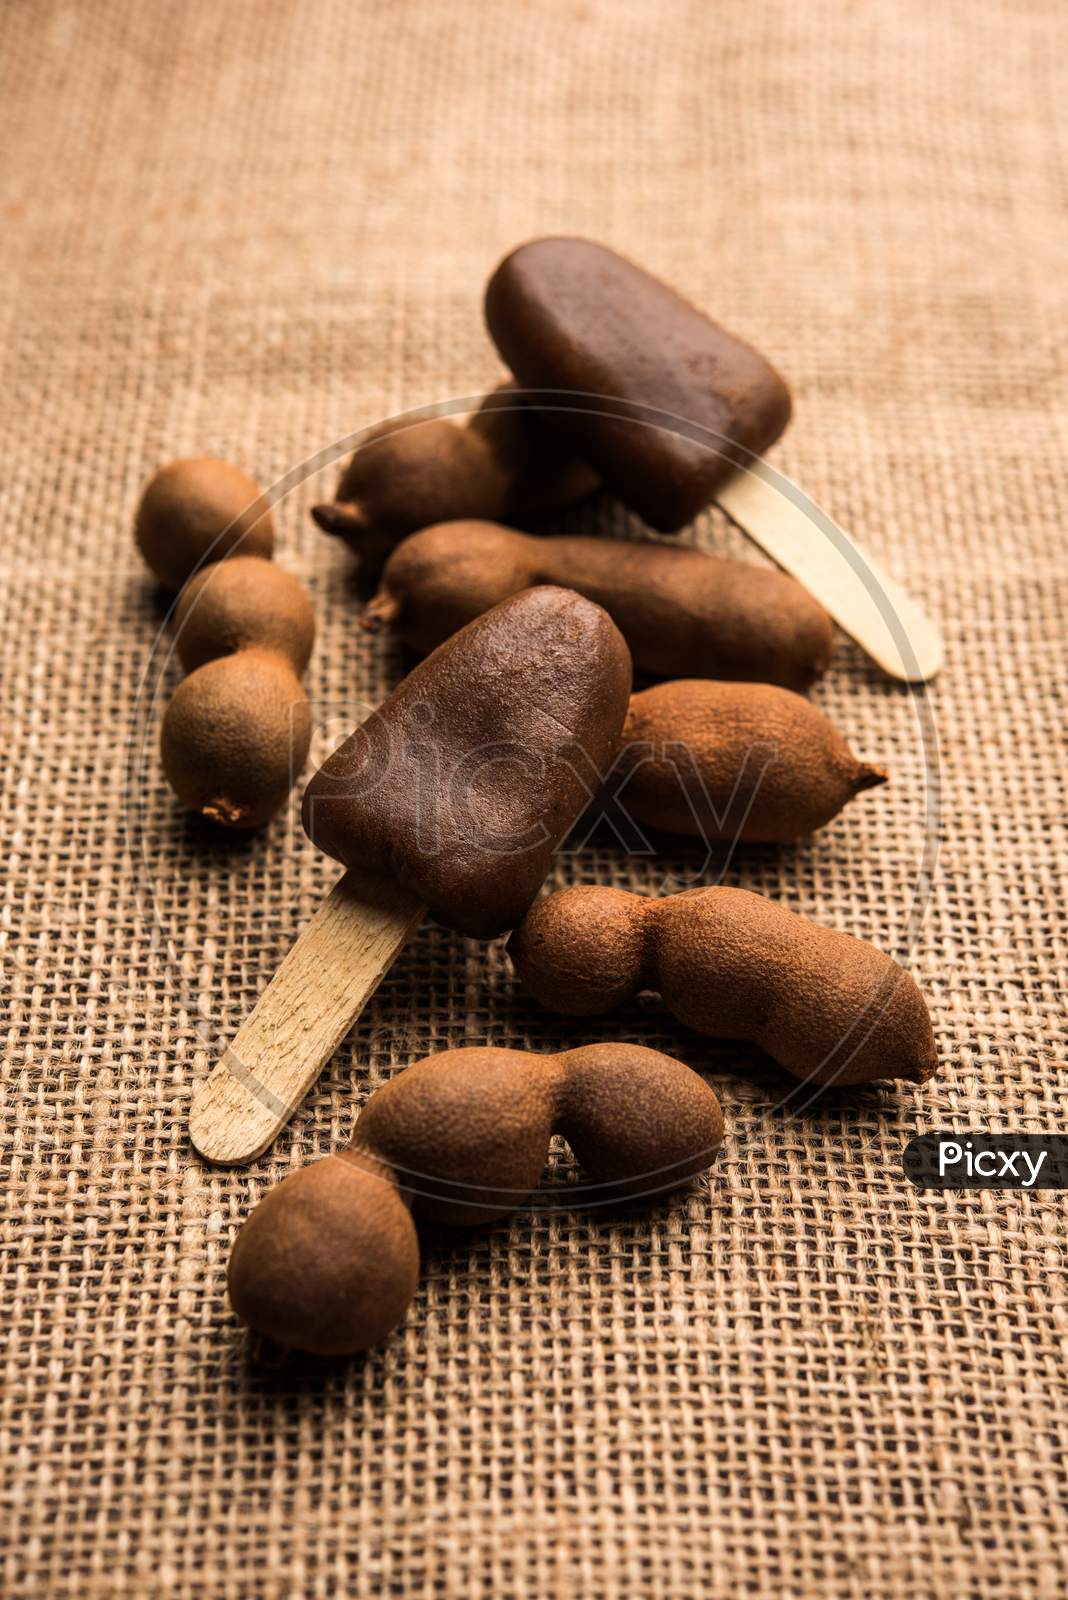 The Imli Or Tamarind Lollipop Is An Indian Stick Candy With A Desi Twist